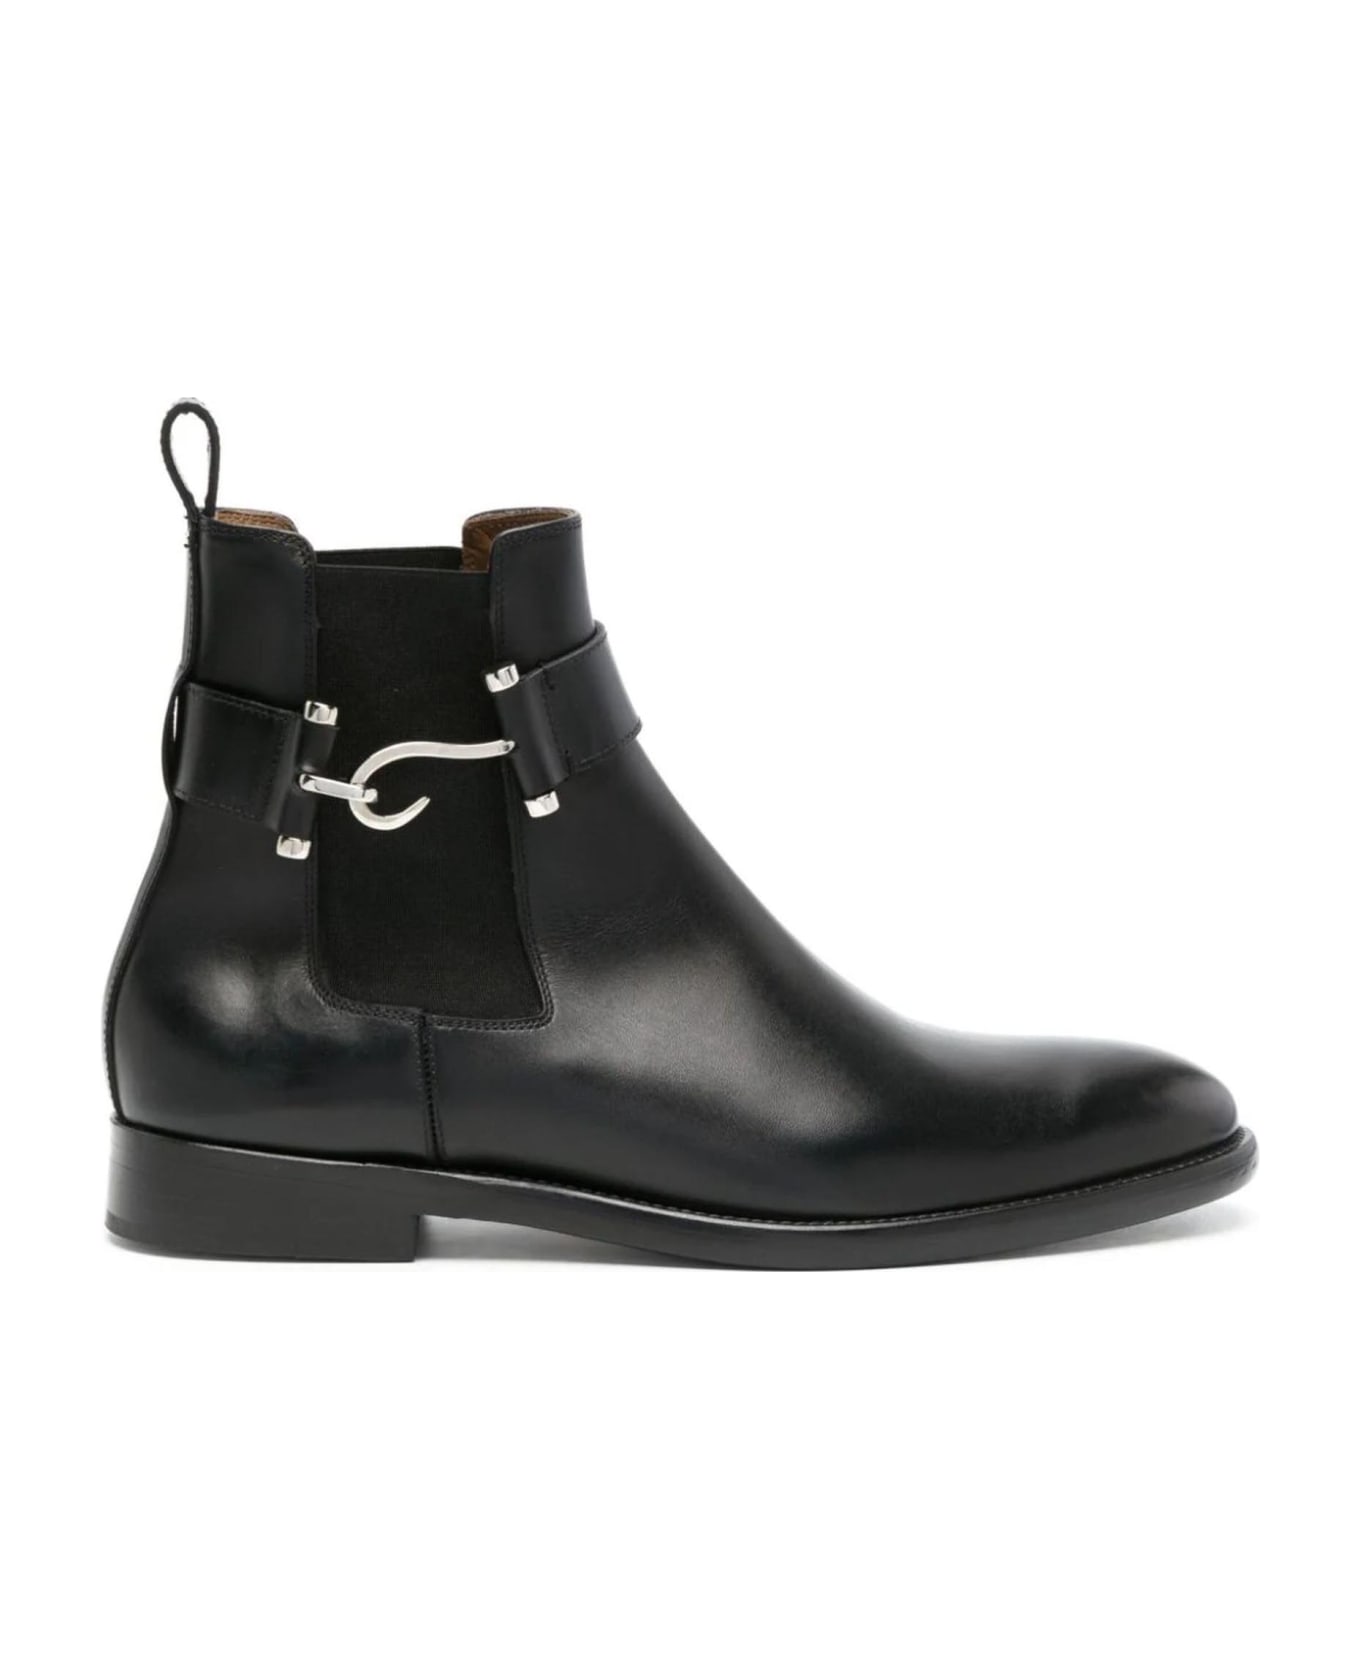 Edhen Milano Black Calf Leather Ankle Boots - Nero